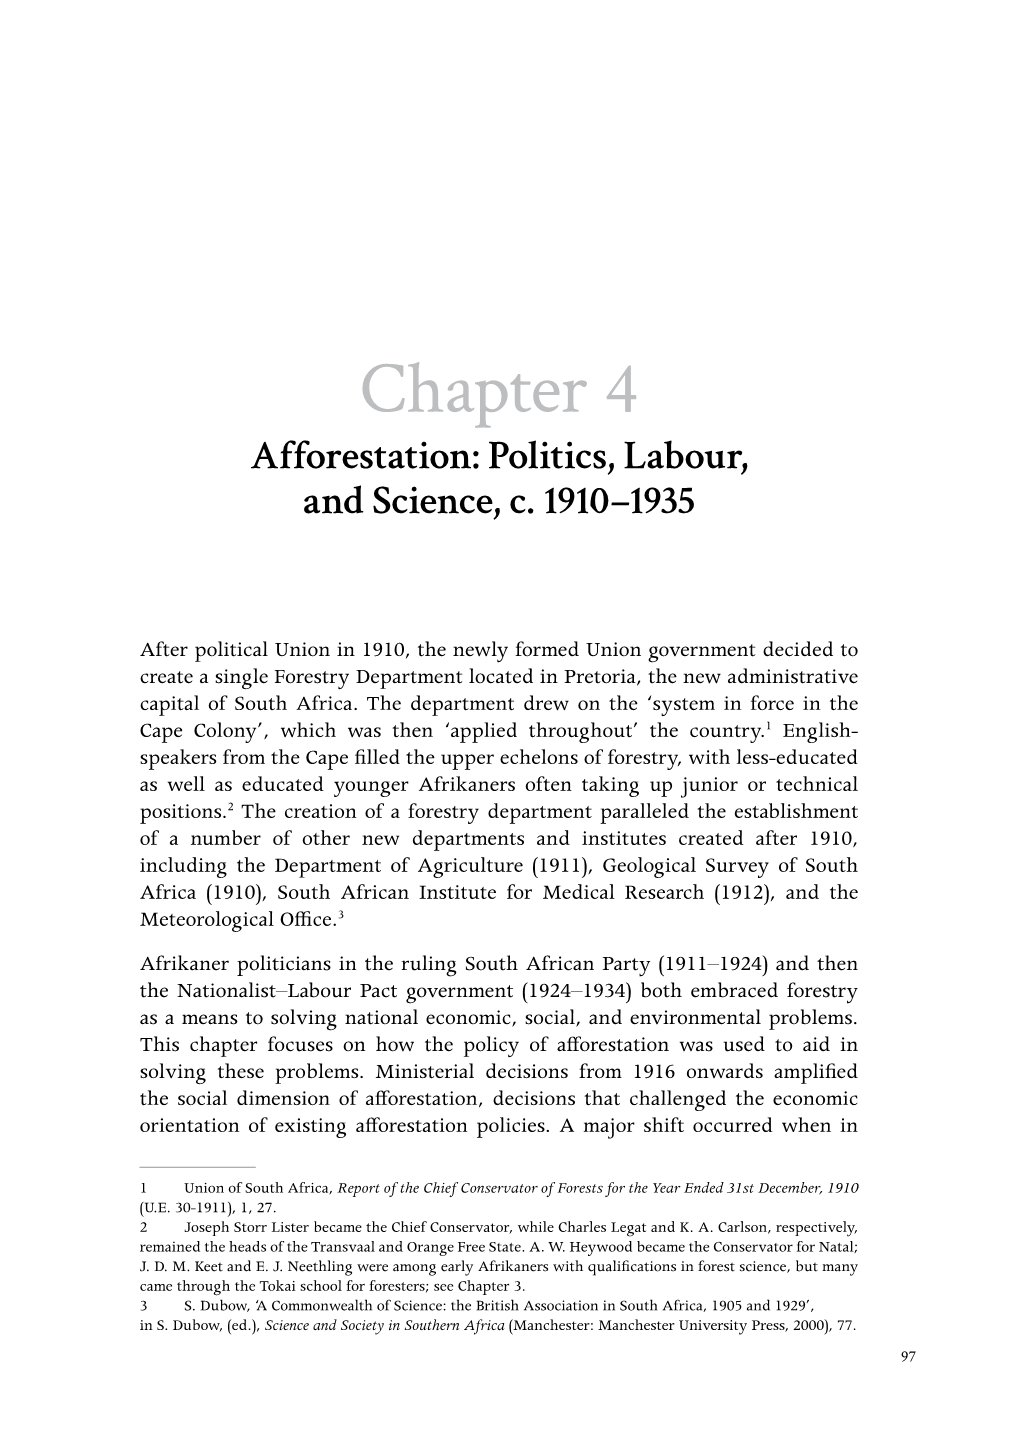 Chapter 4 Afforestation: Politics, Labour, and Science, C